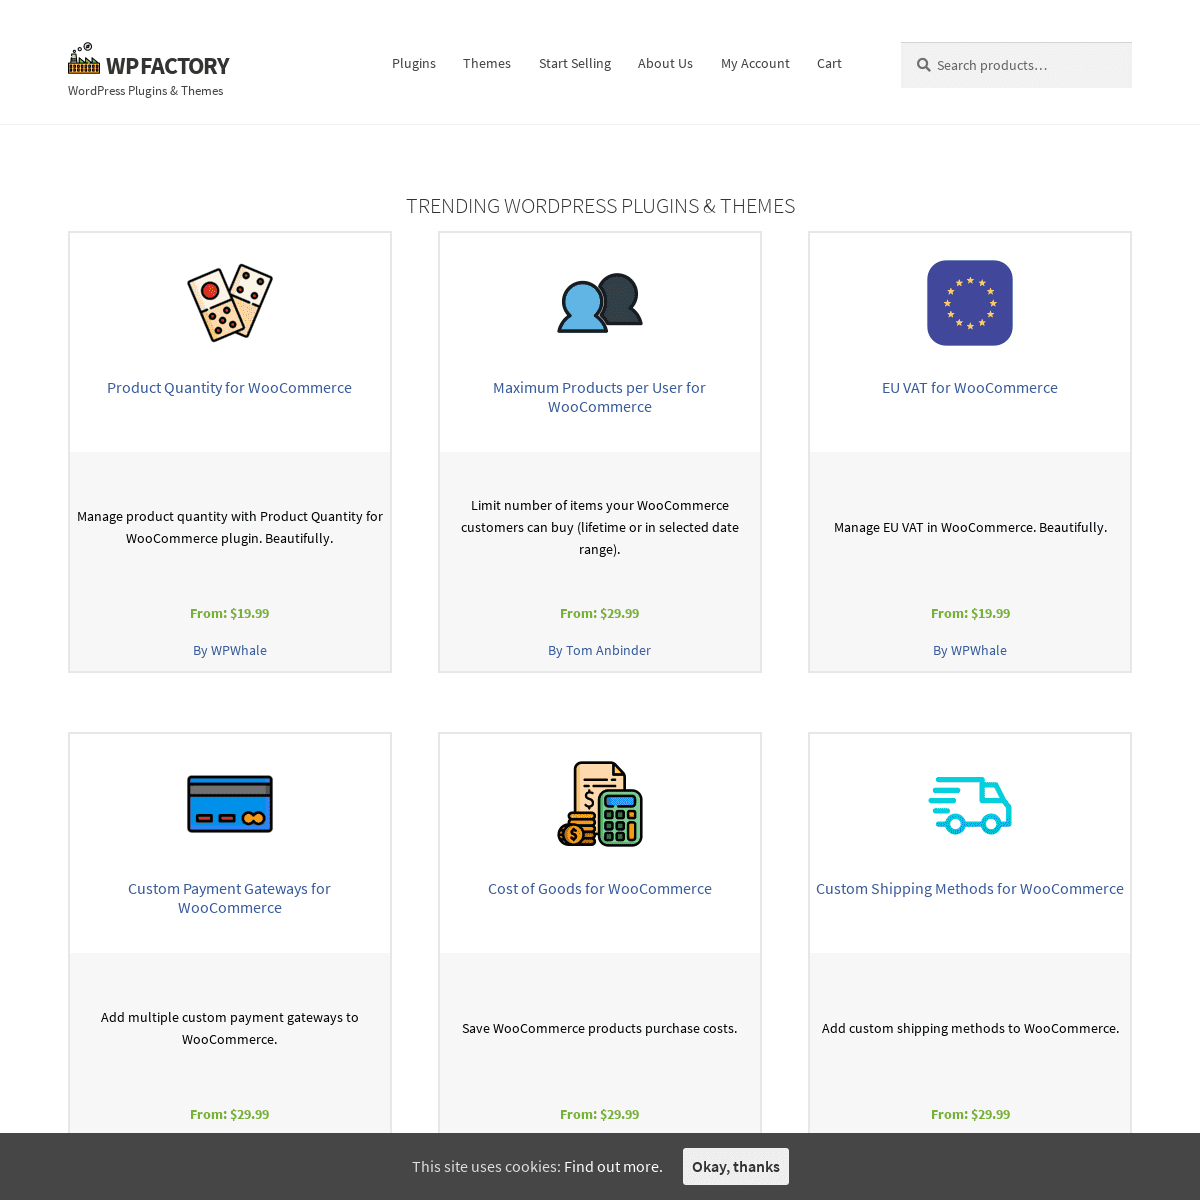 A complete backup of wpfactory.com